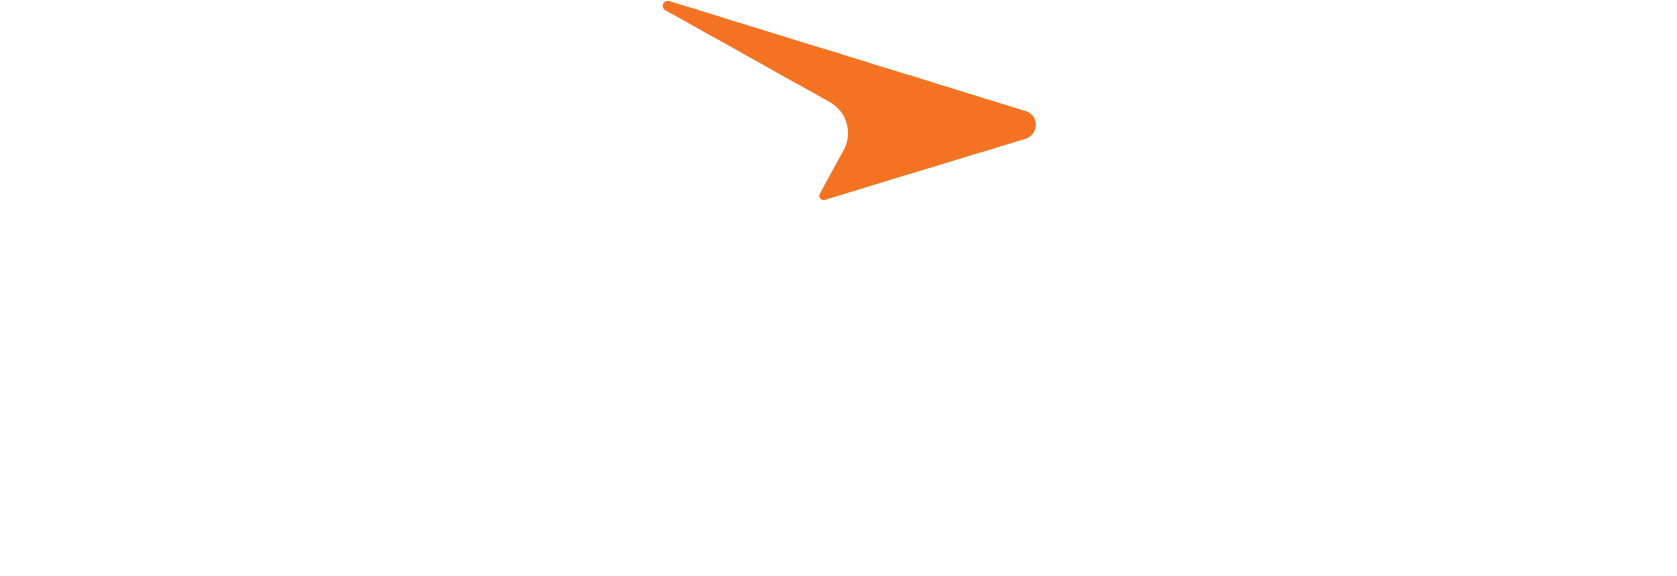 Paycor logo large for dark backgrounds (transparent PNG)